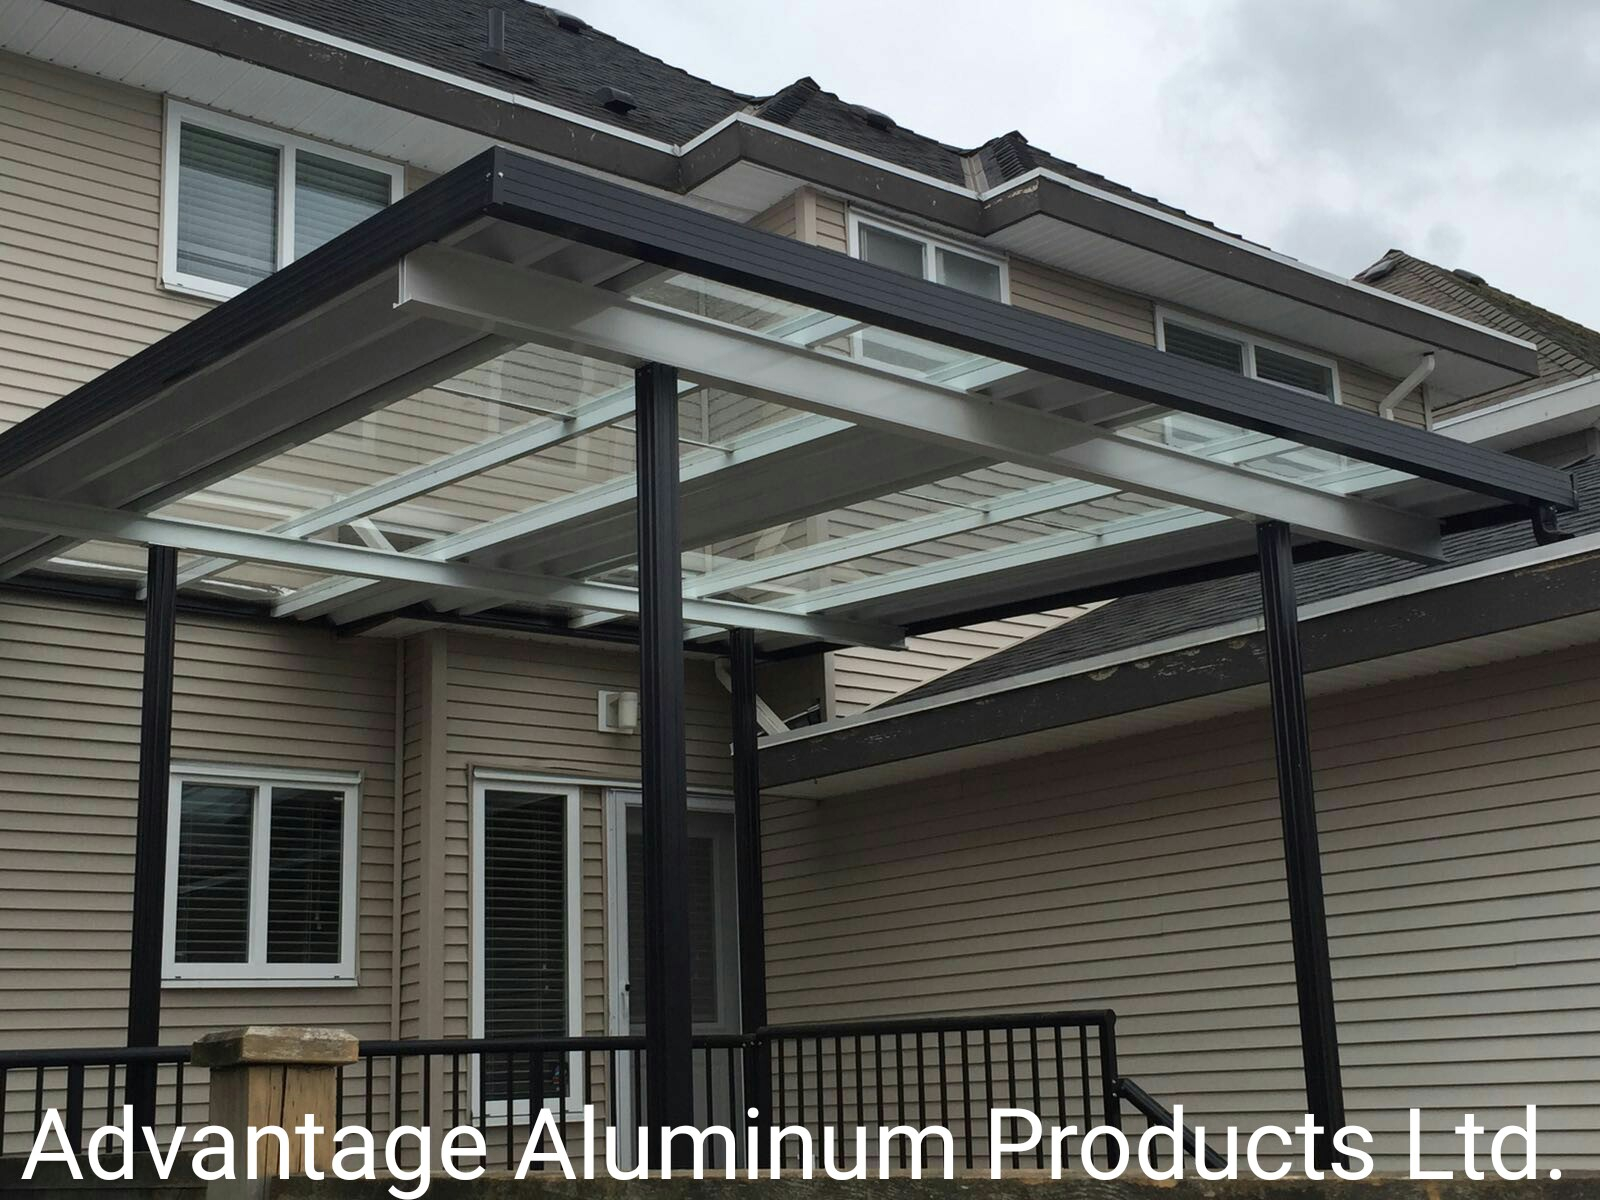 Best Quality Patio Cover Is At Advantage Aluminum Products for proportions 1600 X 1200